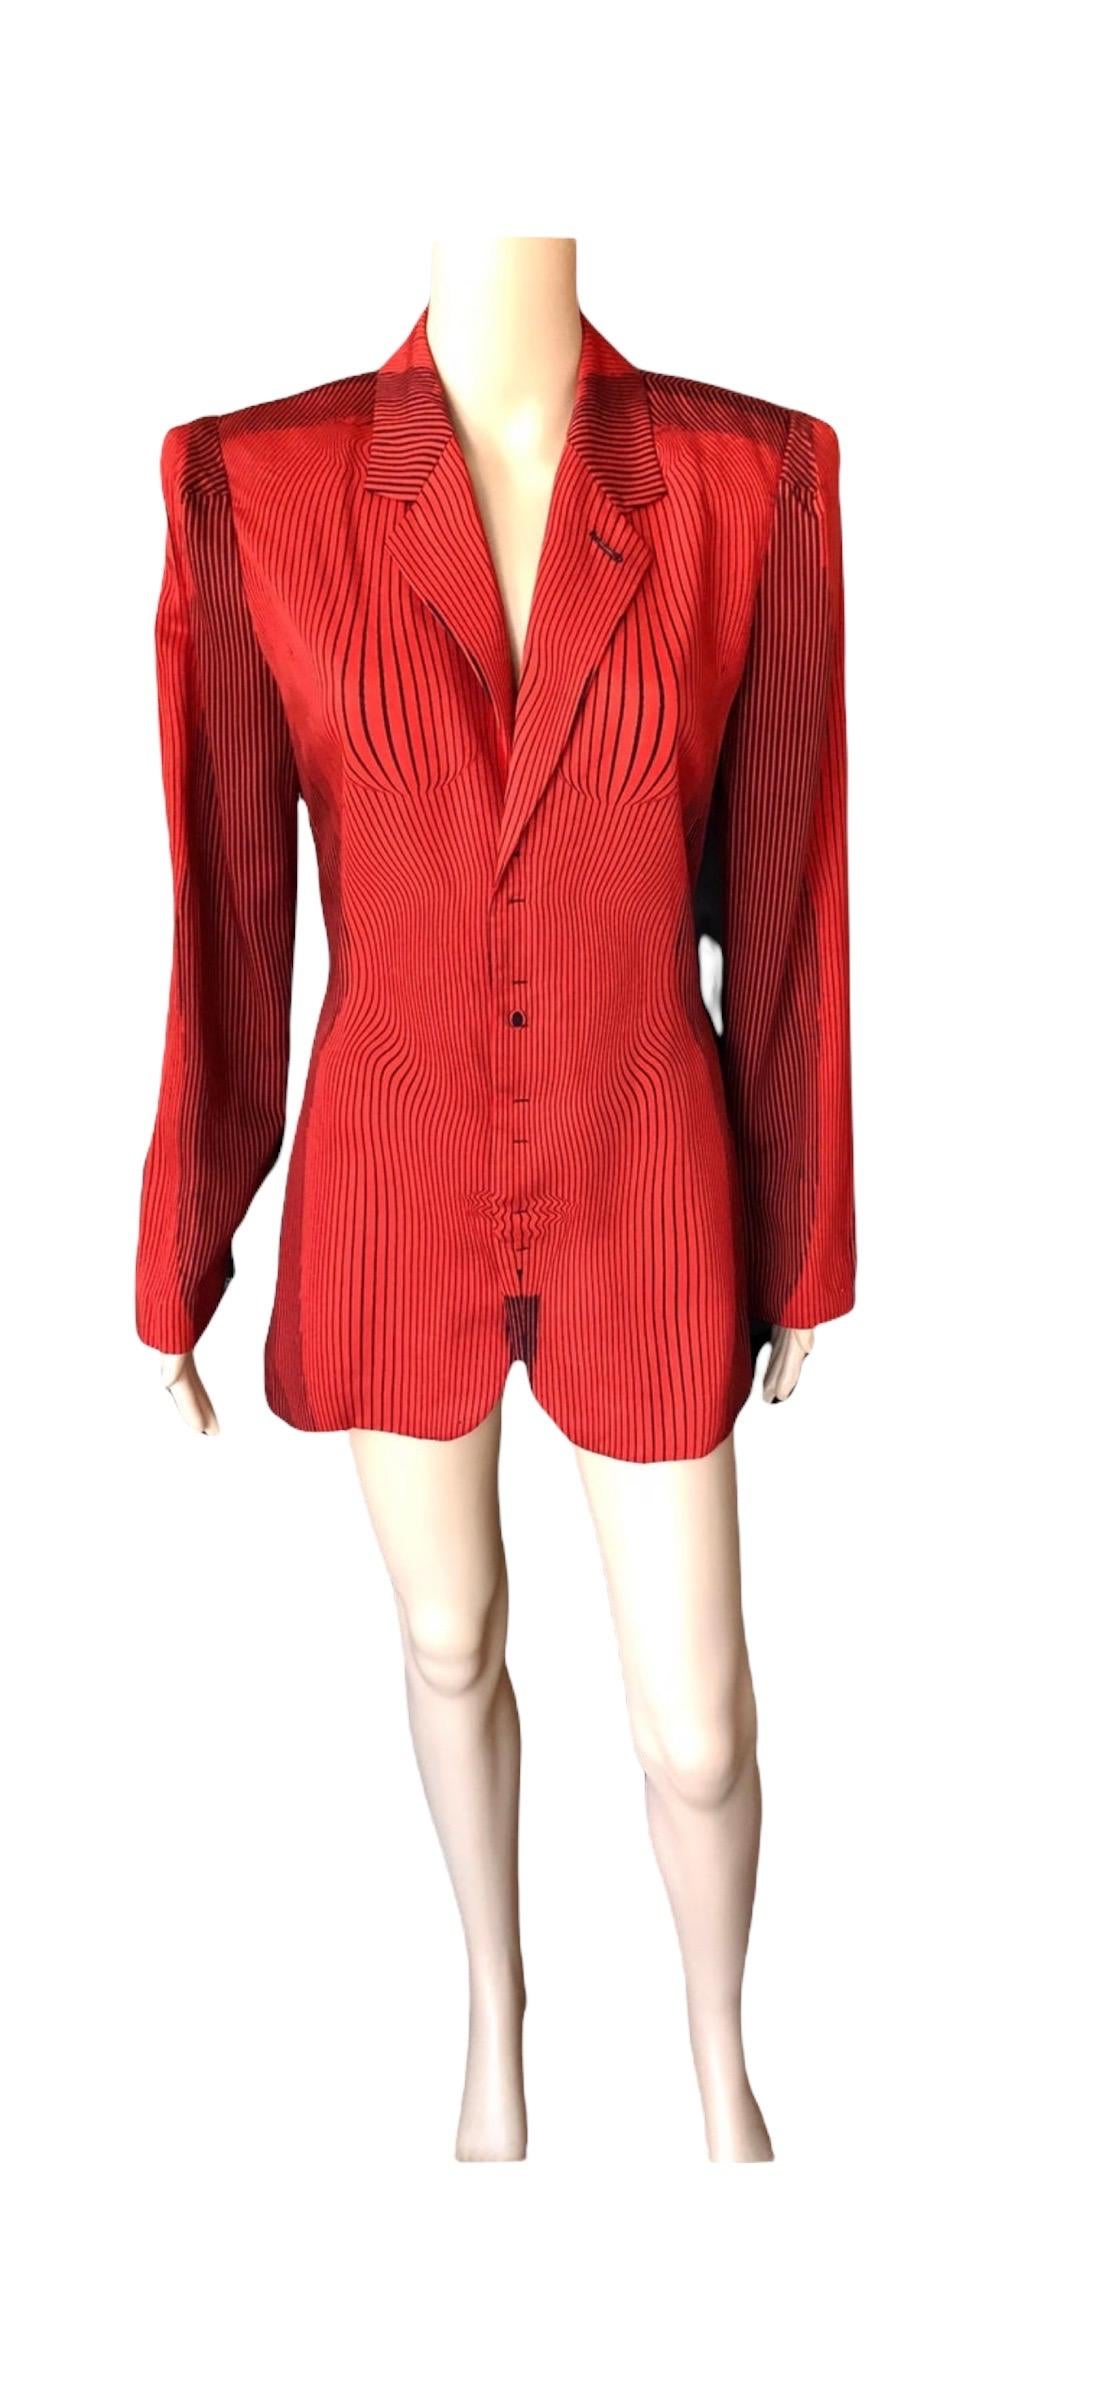 Jean Paul Gaultier S/S 1996 Vintage Cyberbaba Optical Illusion Jacket Blazer Top For Sale 10